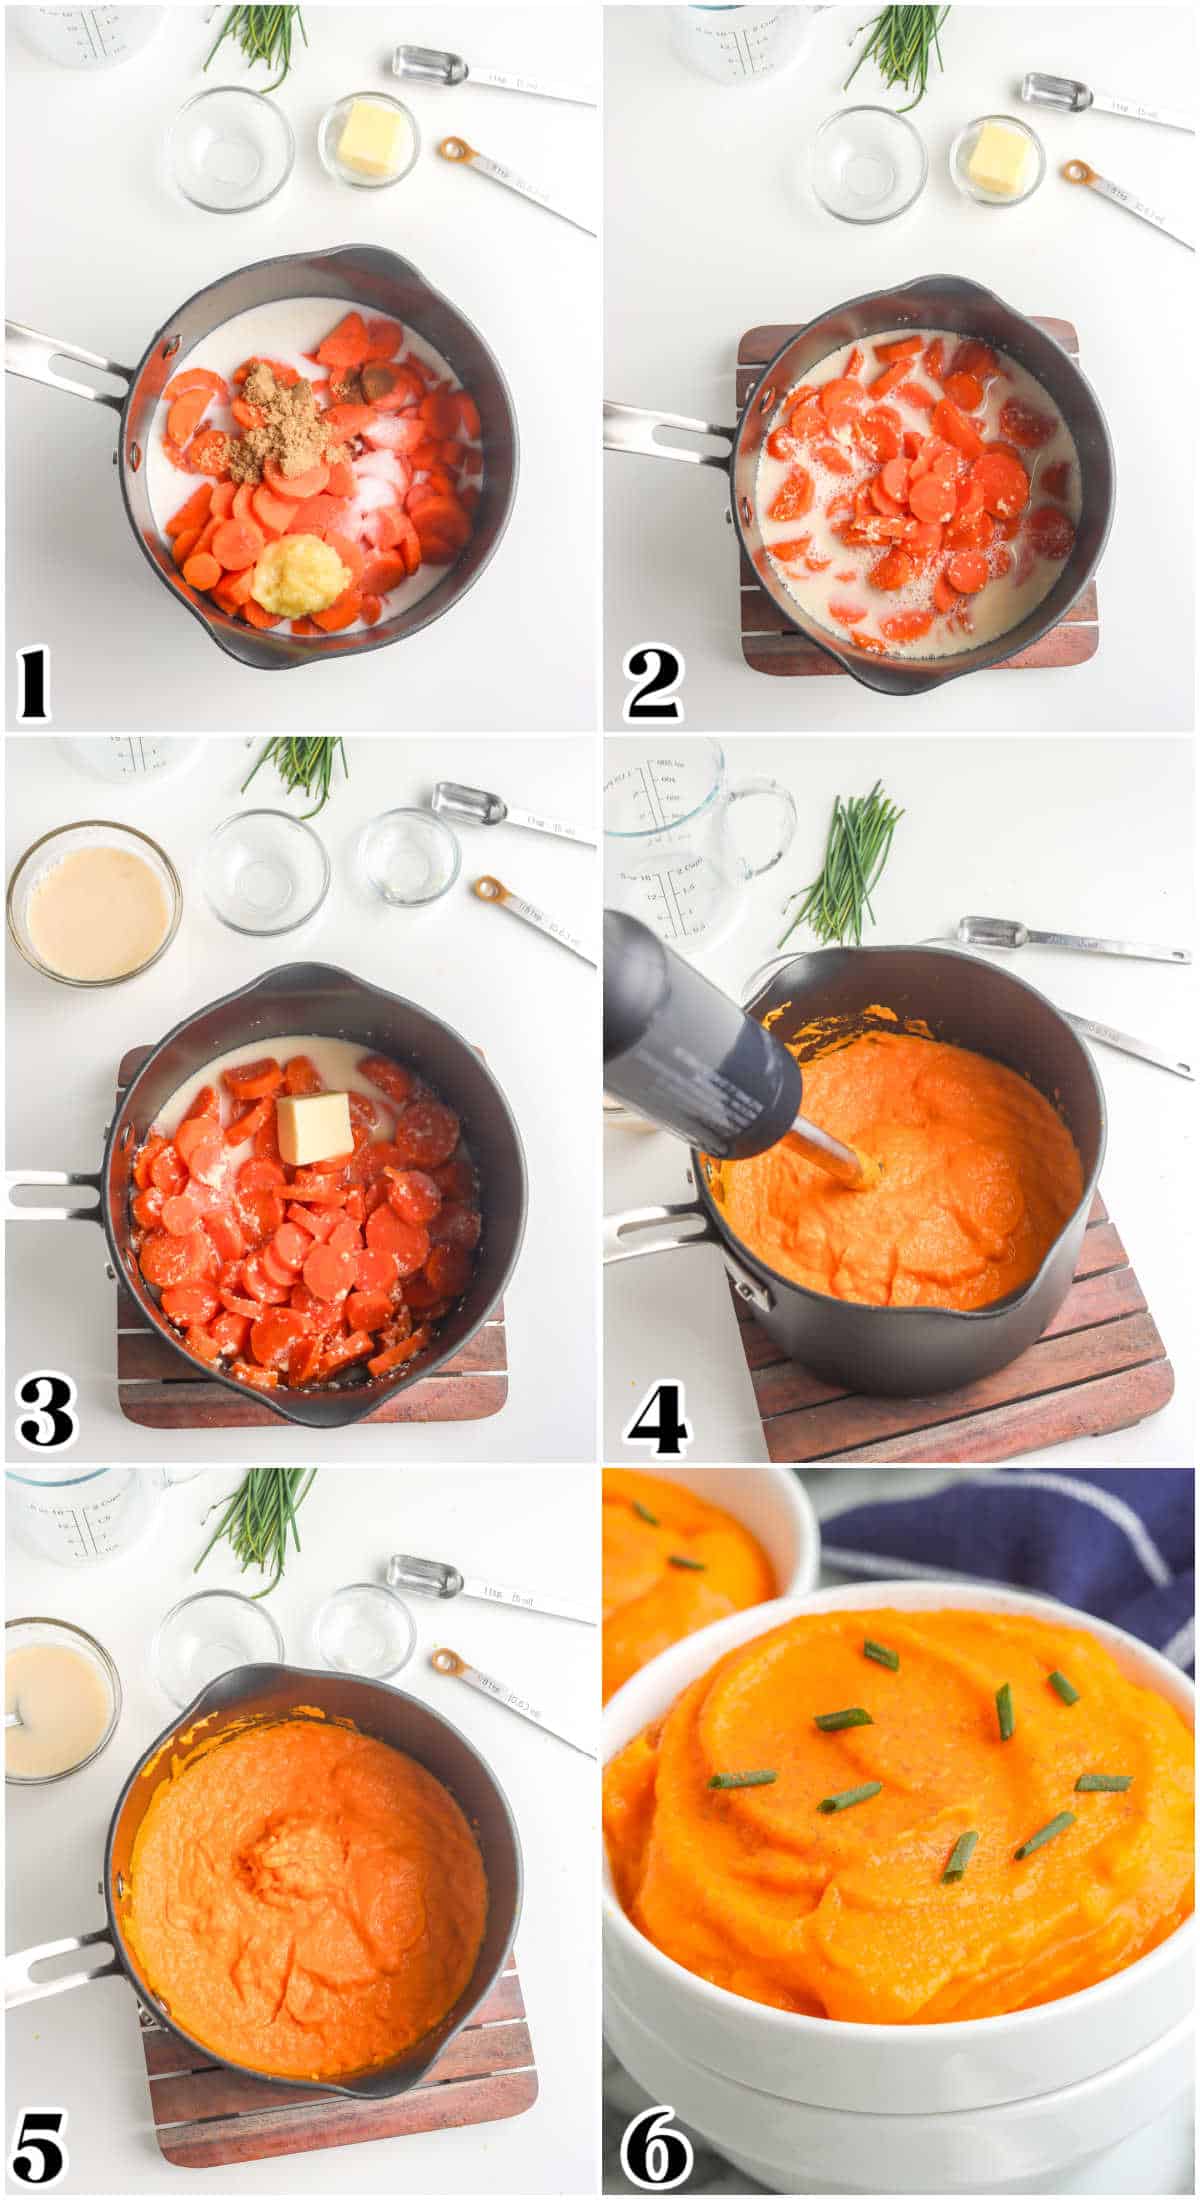 A picture collage shwoing how to make this recipe.